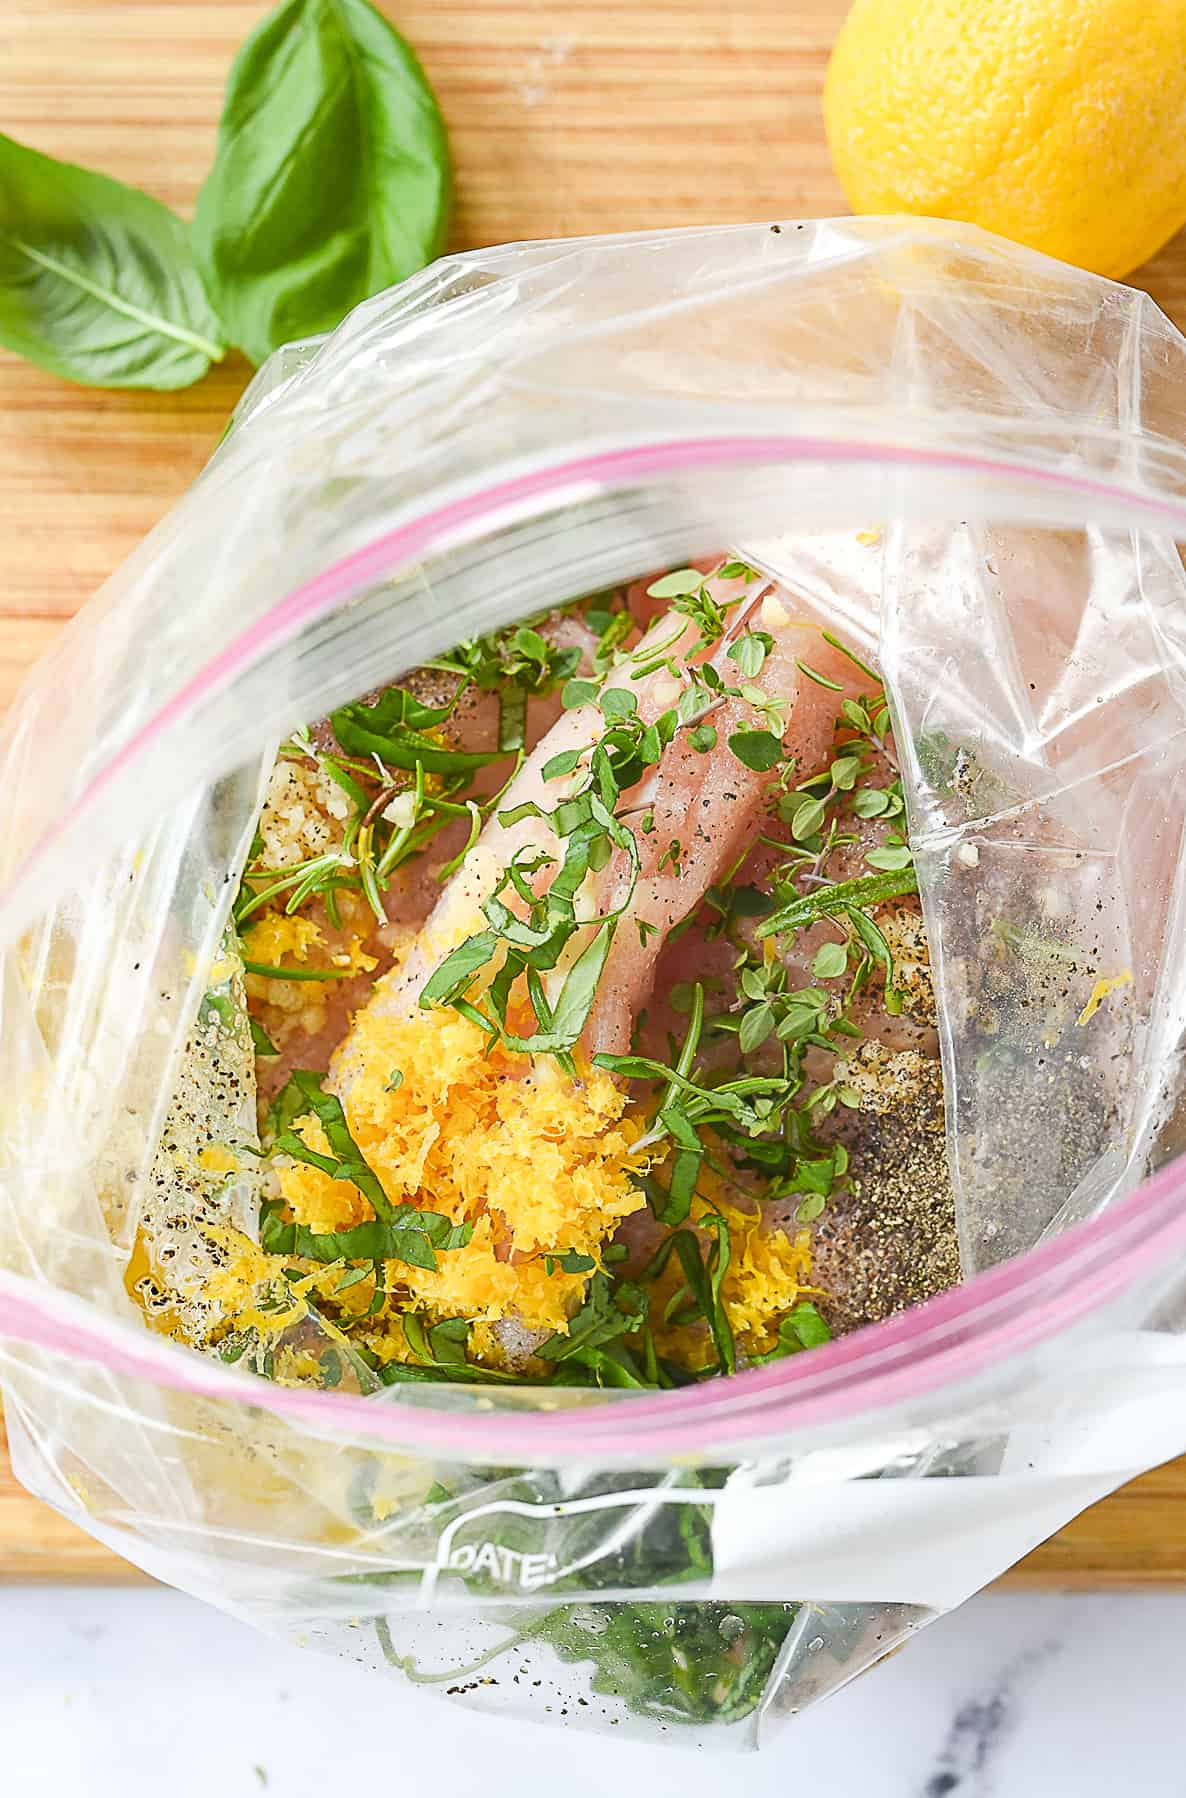 lemon herb marinade and chicken in bag